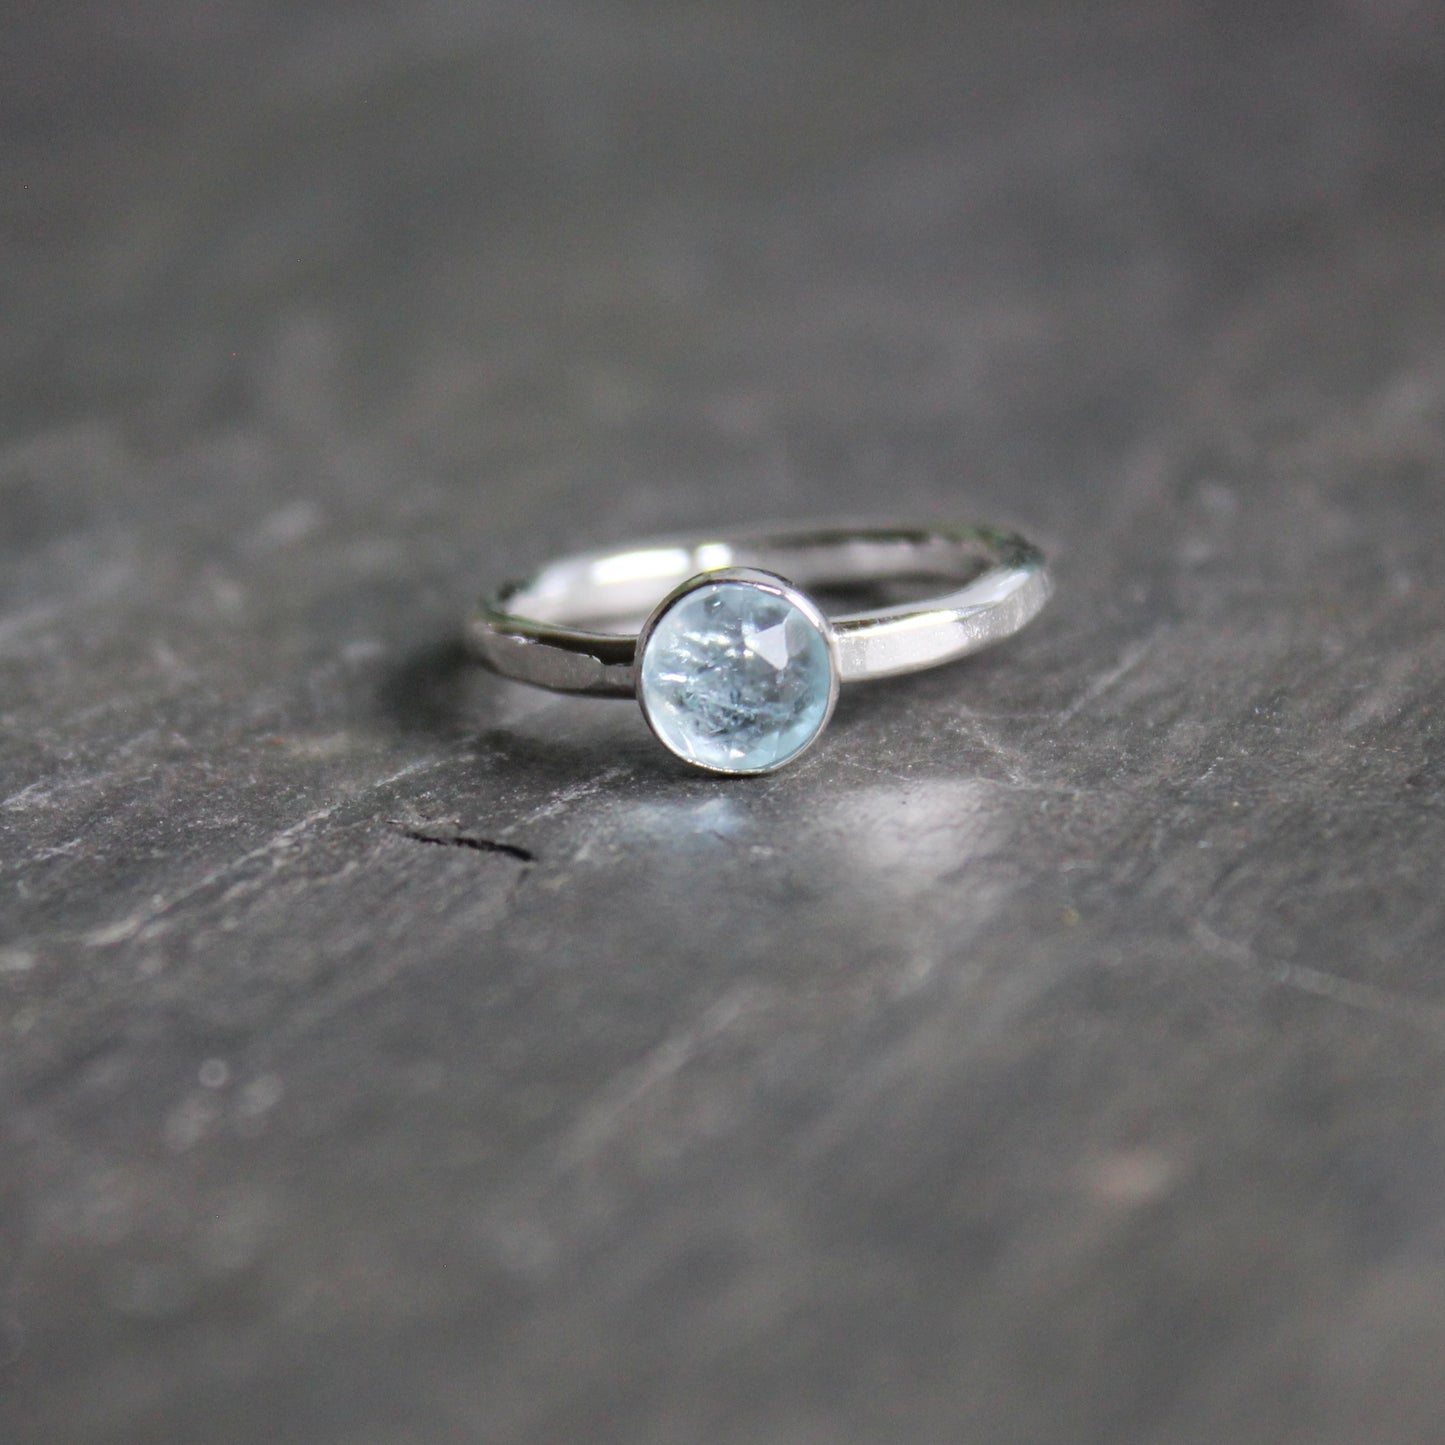 6mm rose cut aquamarine in a sterling silver bezel setting on a sturdy silver band. 